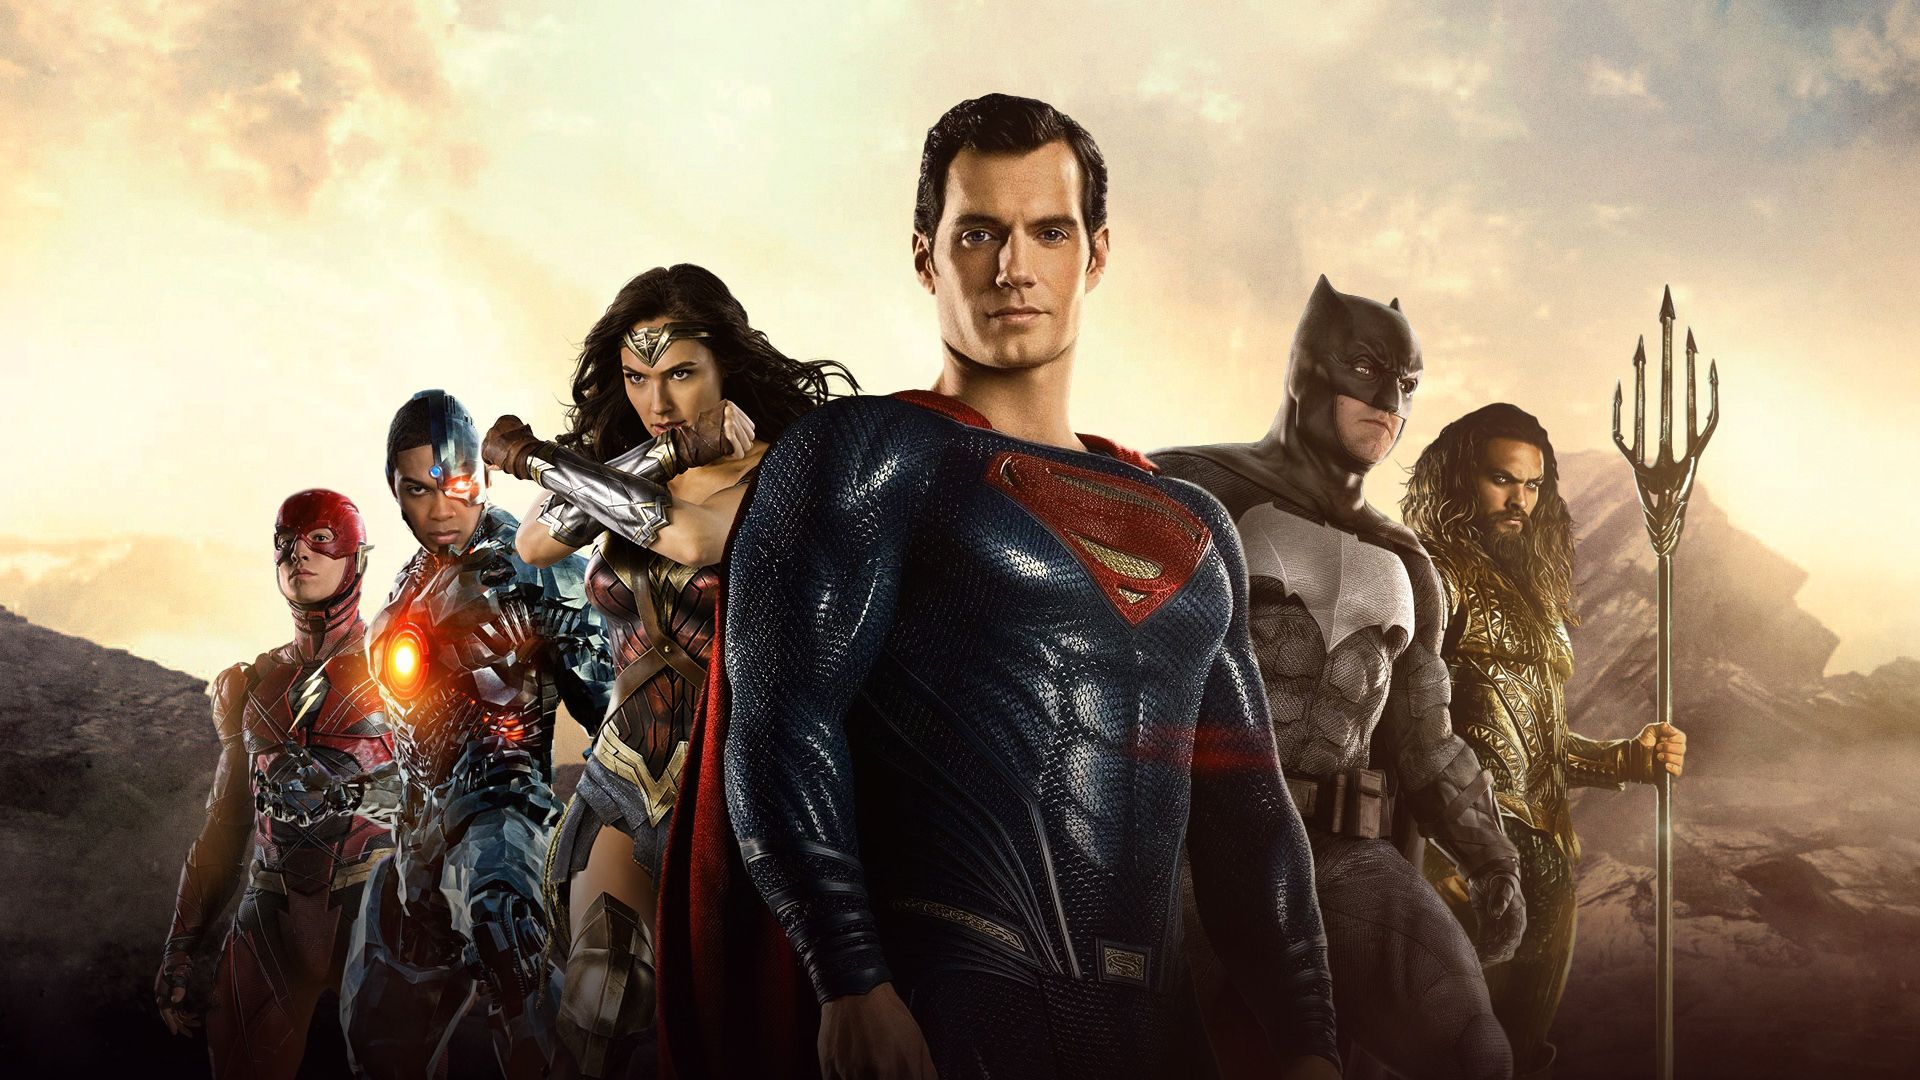 Justice League Snyder Cut Release Date, Trailer, HBO Max Premiere, Cast Details and Plot Difference